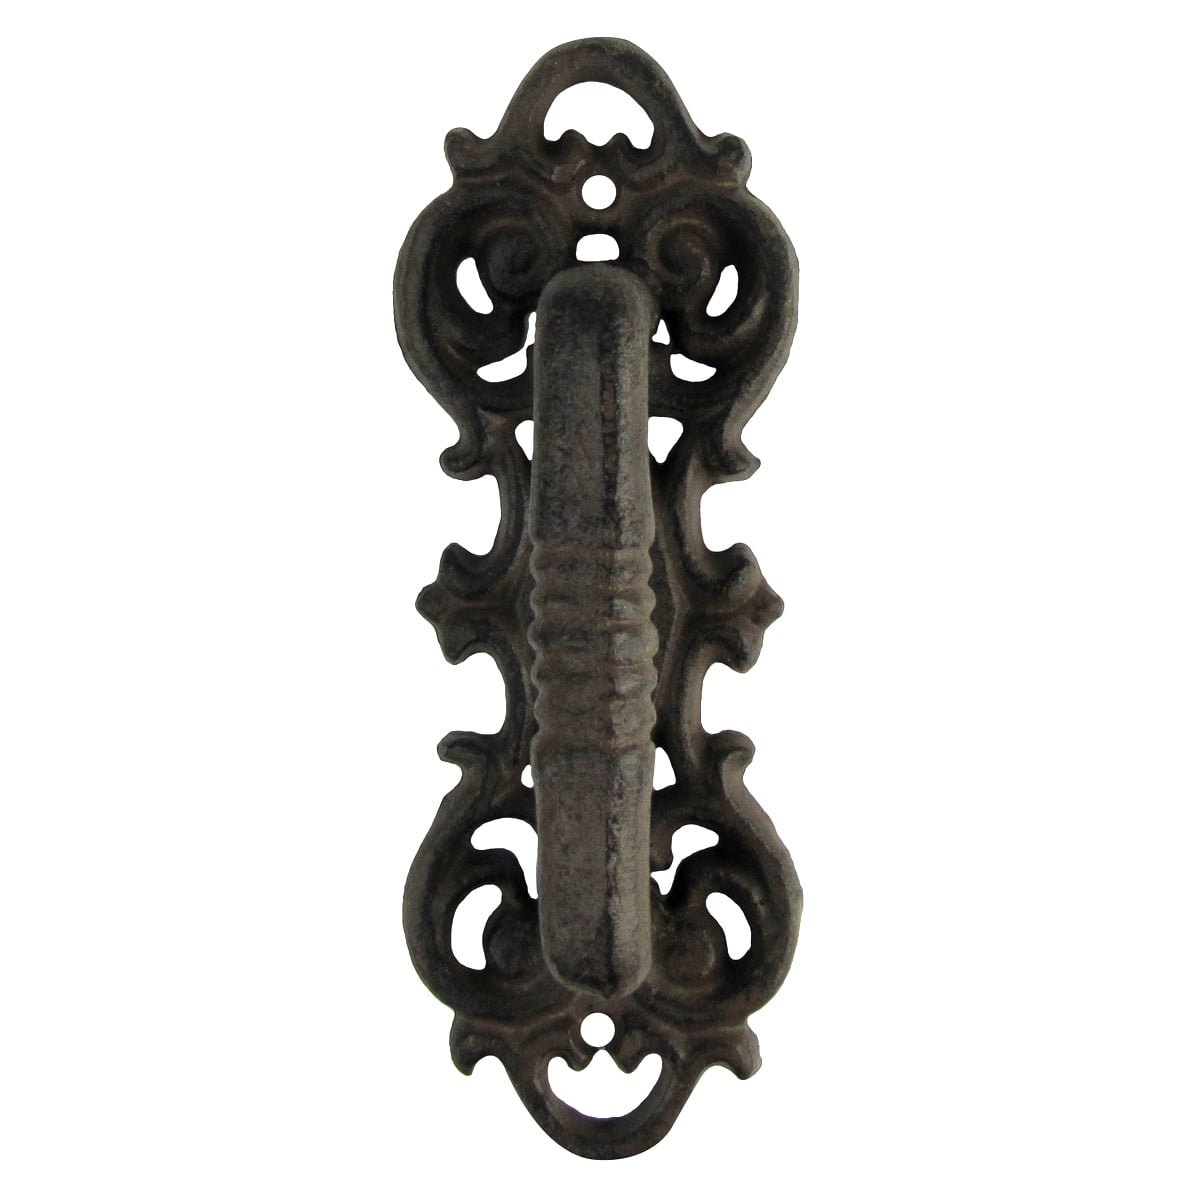 Details about   4 Cast Iron LARGE Antique Style FANCY Barn Handle Gate Pull Shed Door Handles 